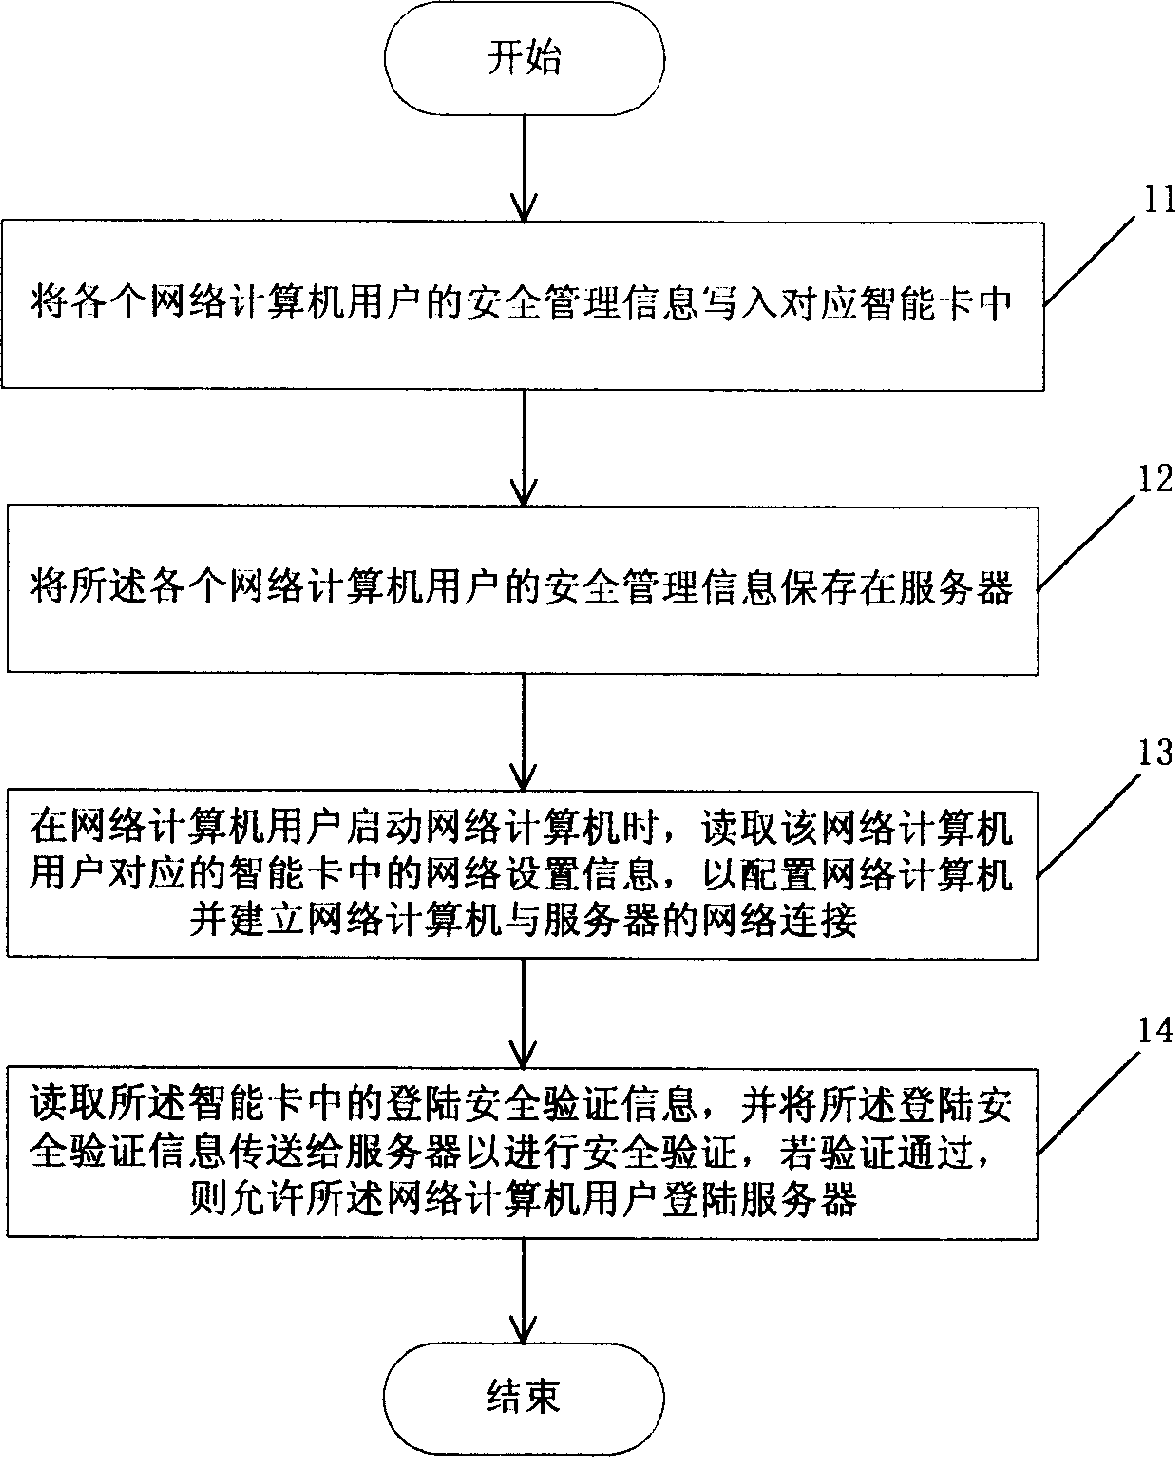 Security management method and system for networked computer users